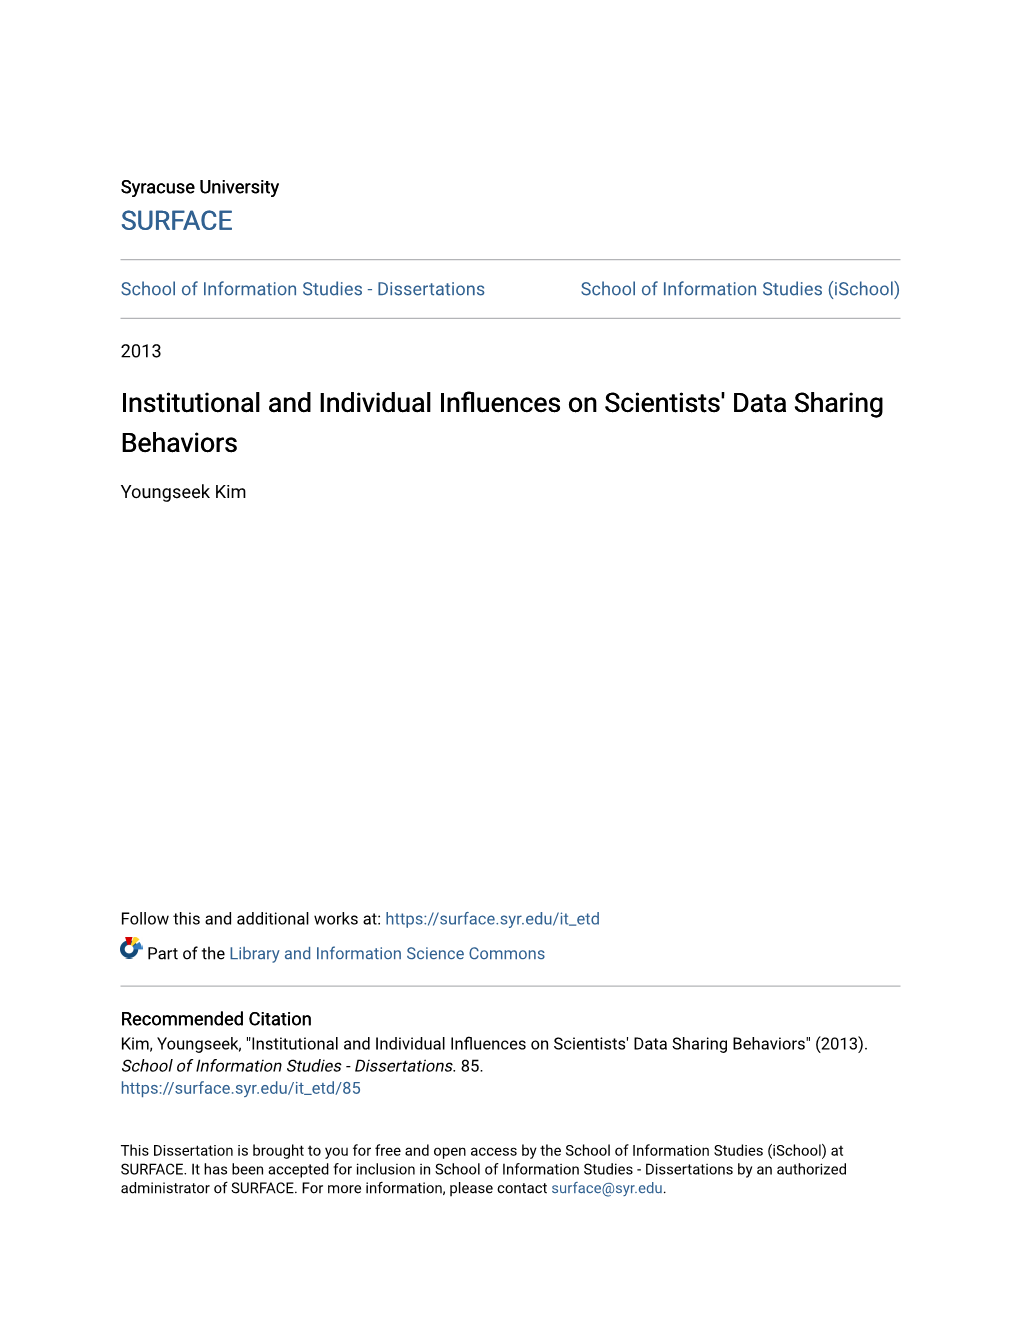 Institutional and Individual Influences on Scientists' Data Sharing Behaviors